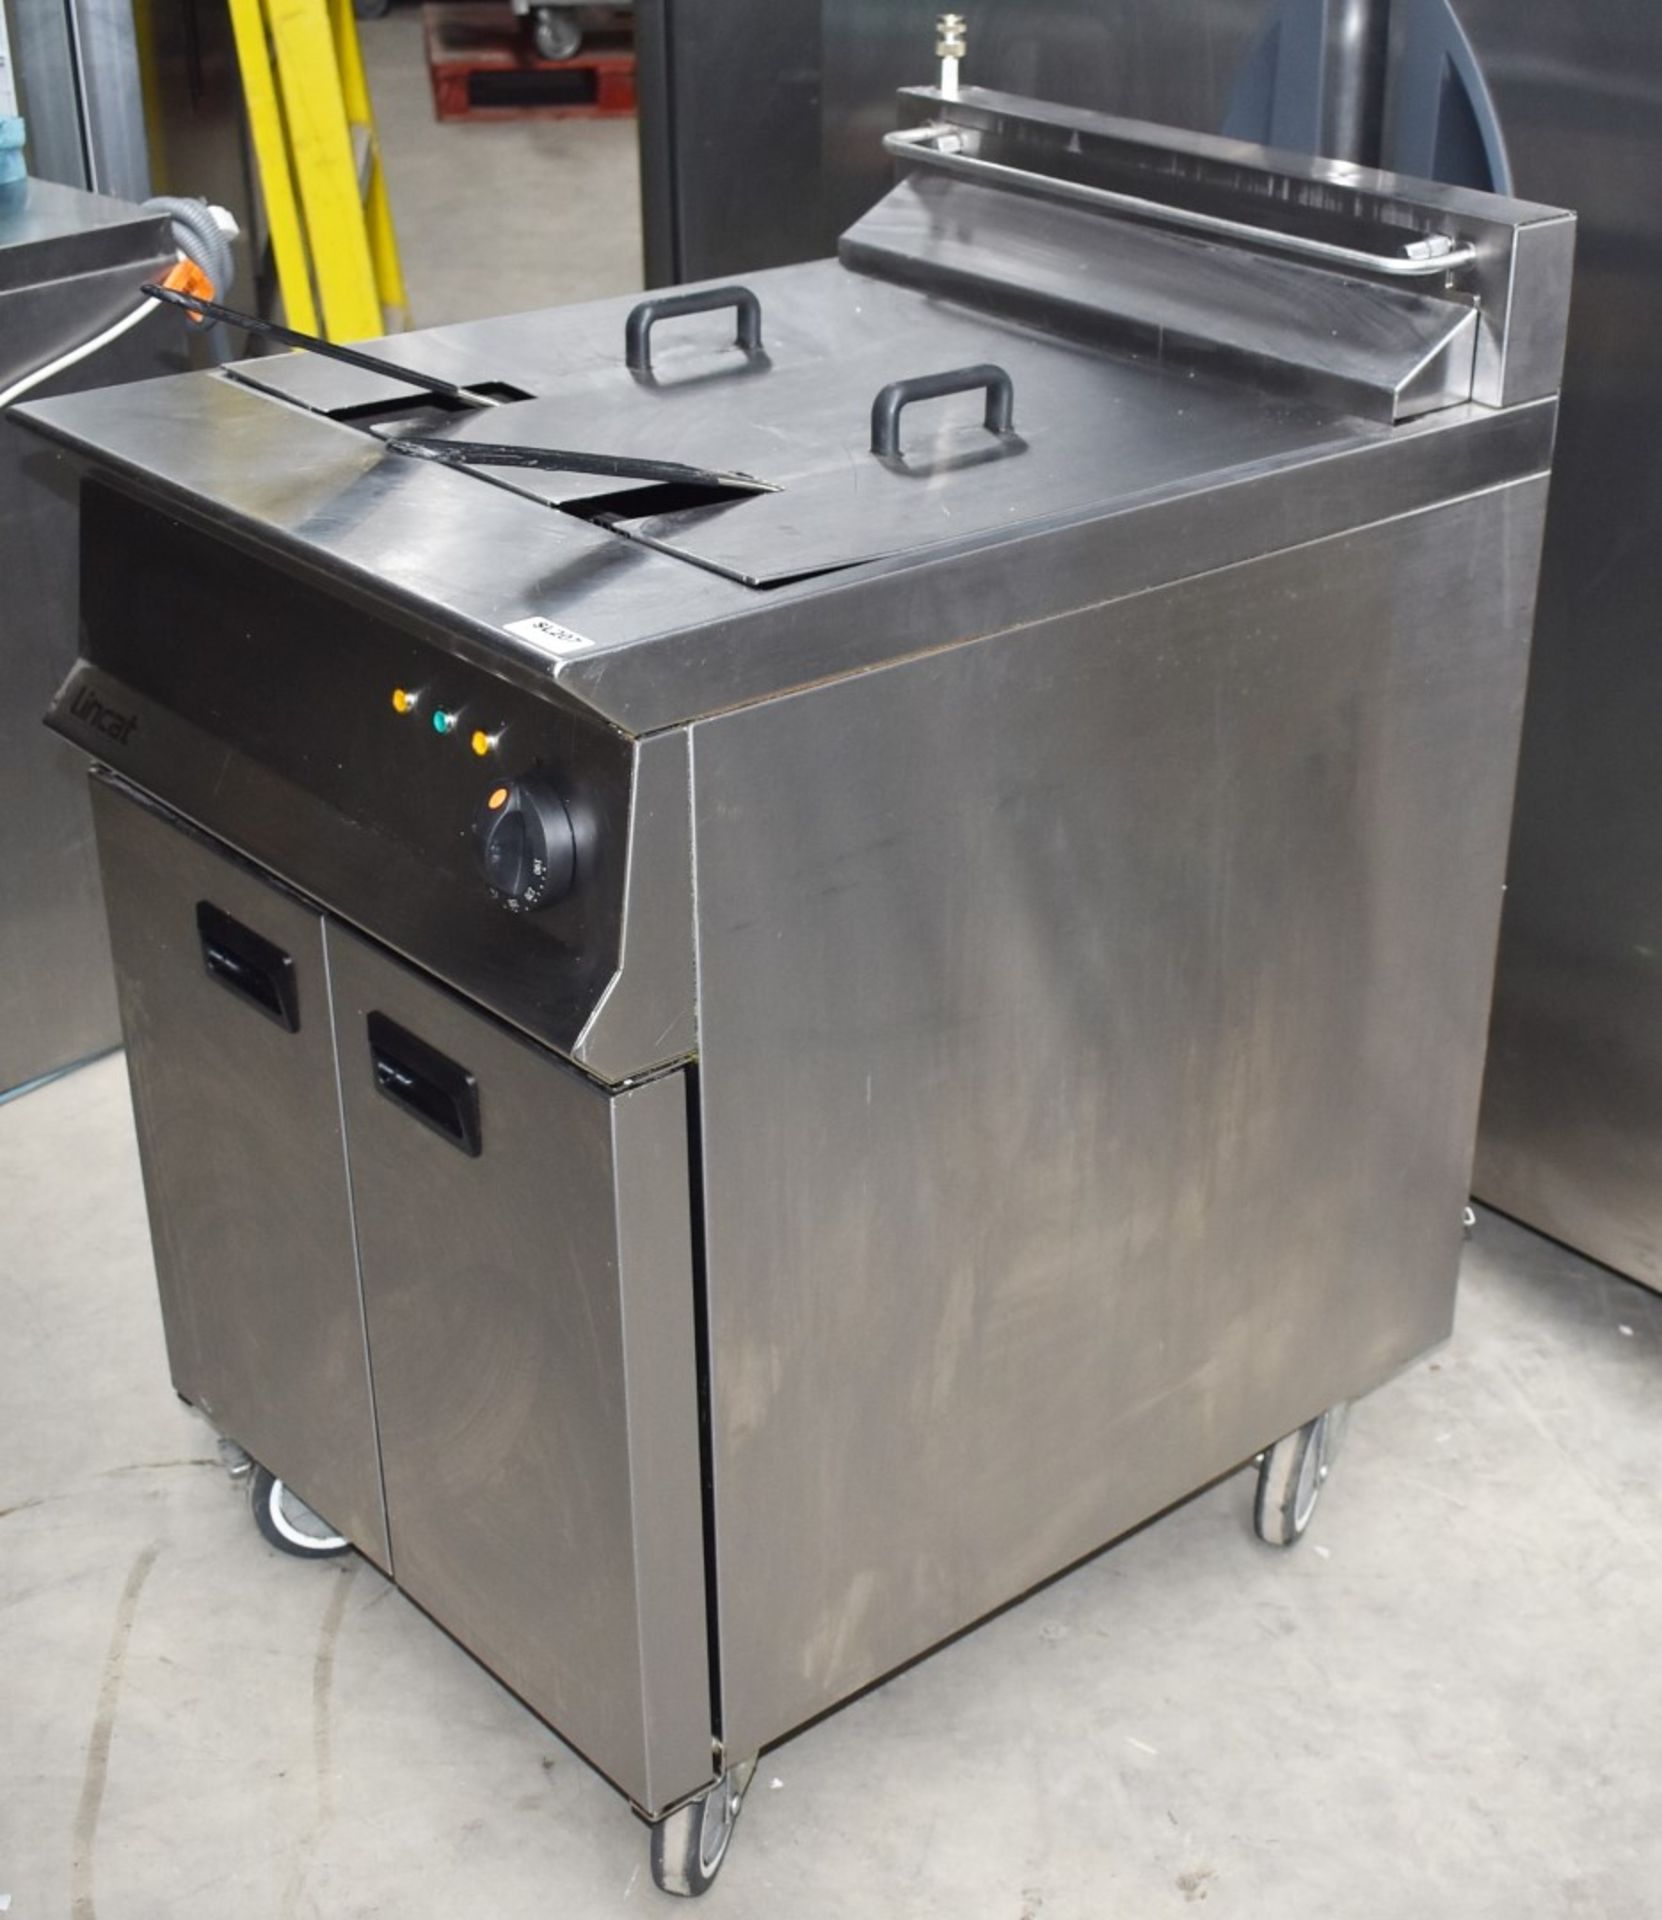 1 x Lincat Opus 800 OE8108 Single Tank Electric Fryer With Filtration - 37L Tank With Two - Image 14 of 17